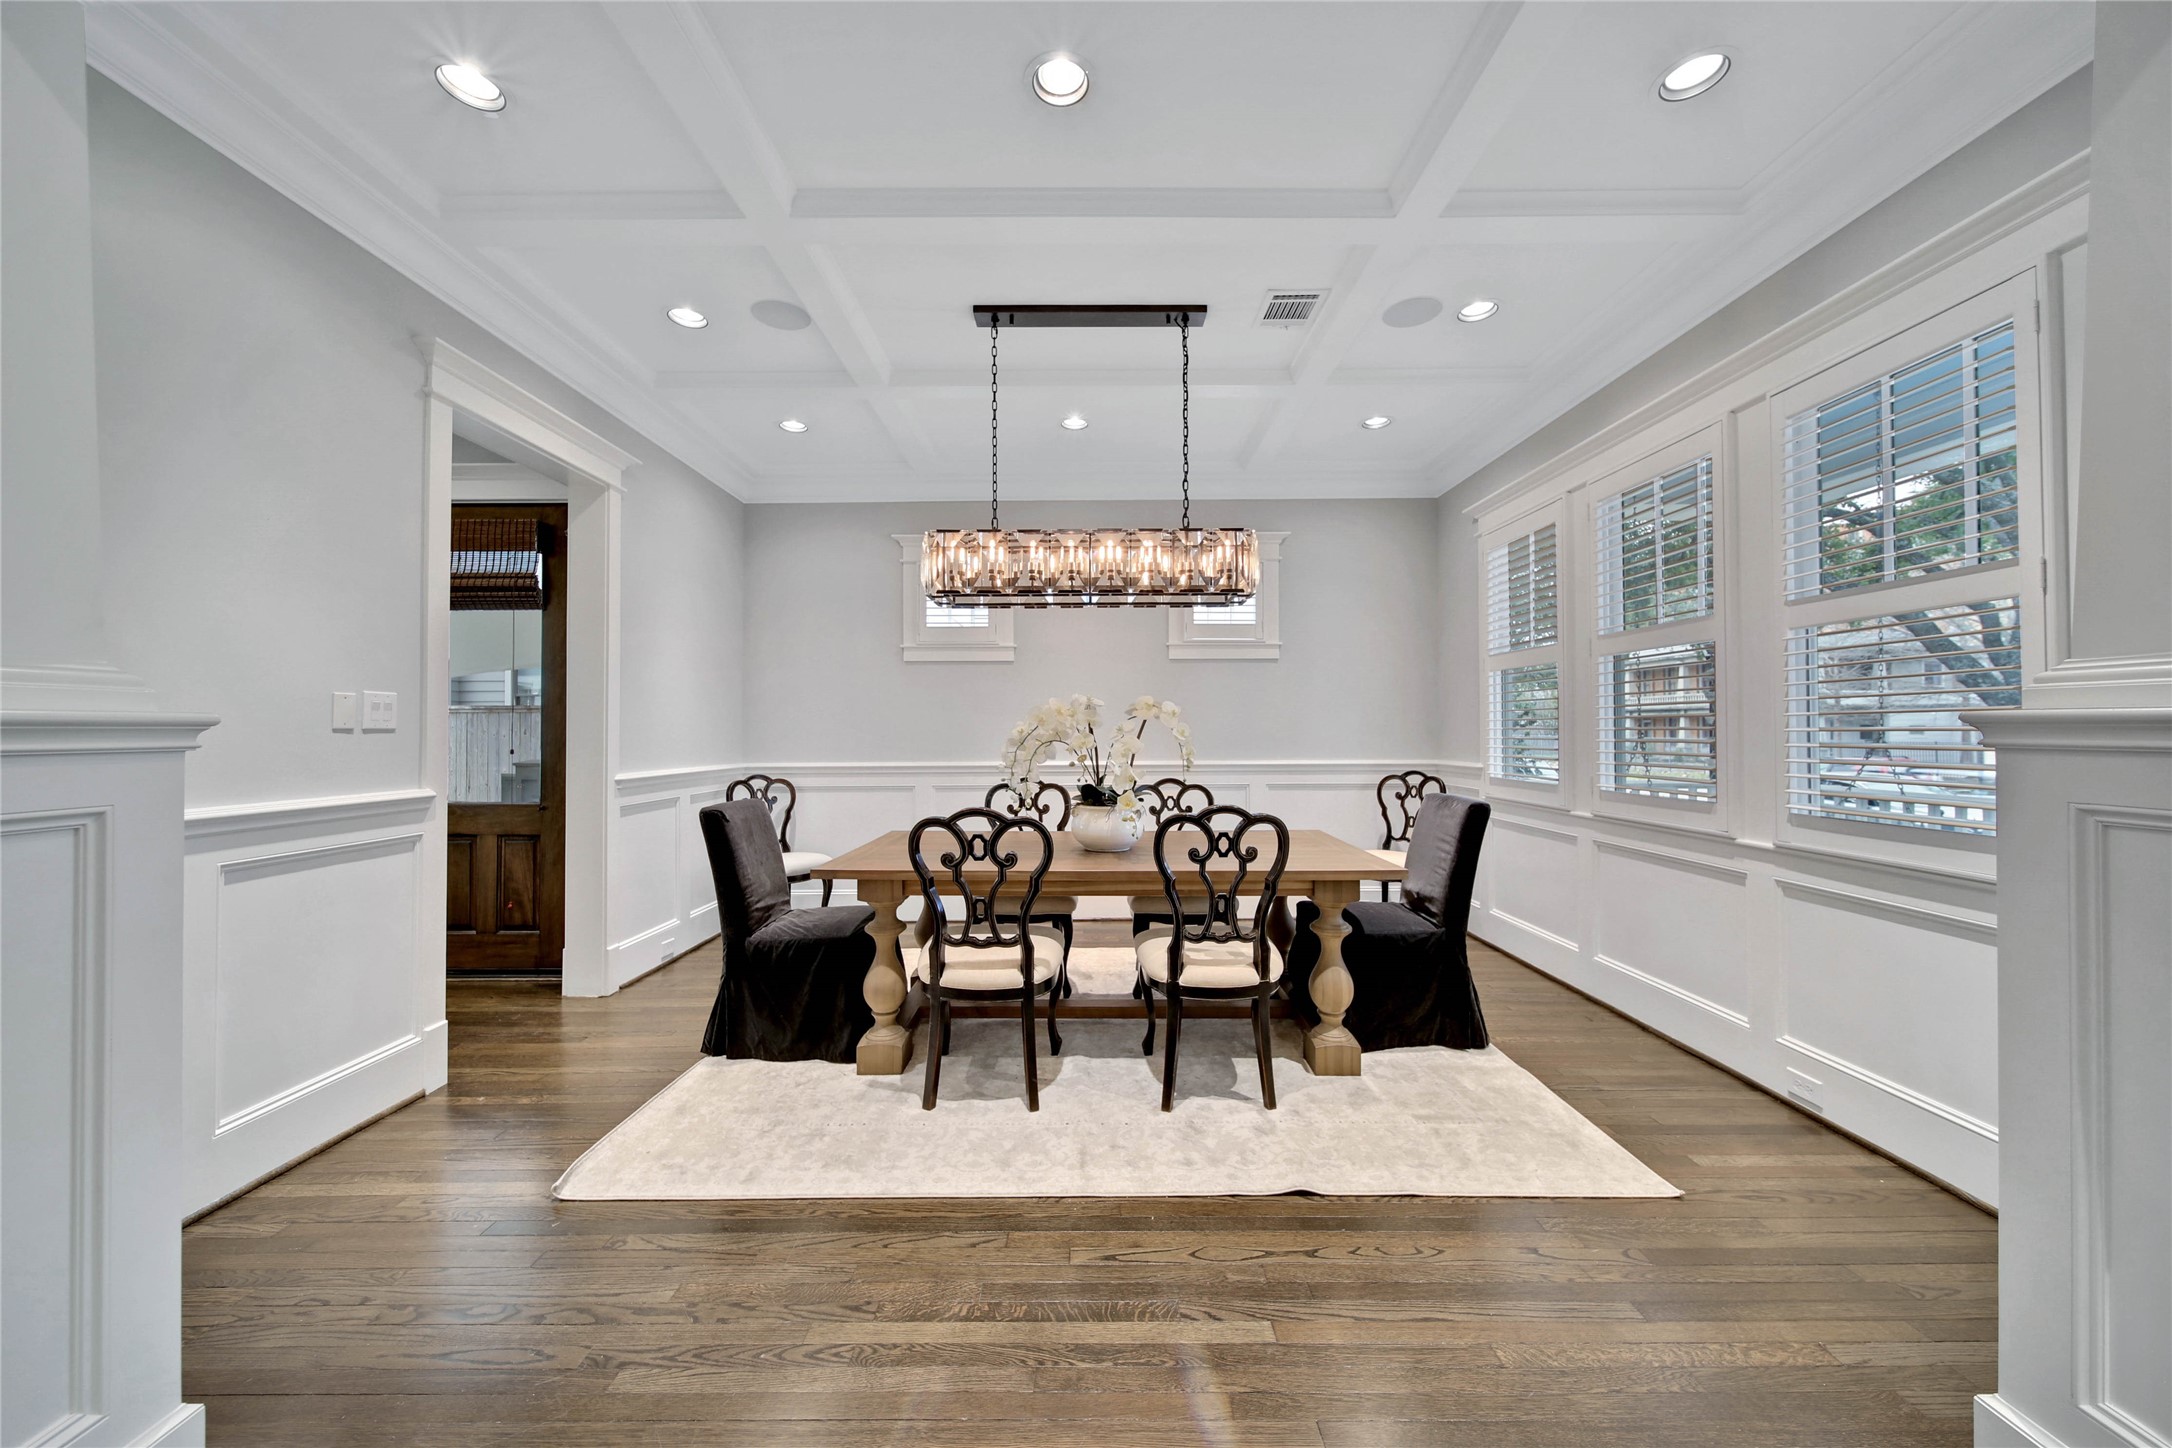 This elegant dining room is the perfect space for entertaining and enjoying meals together.